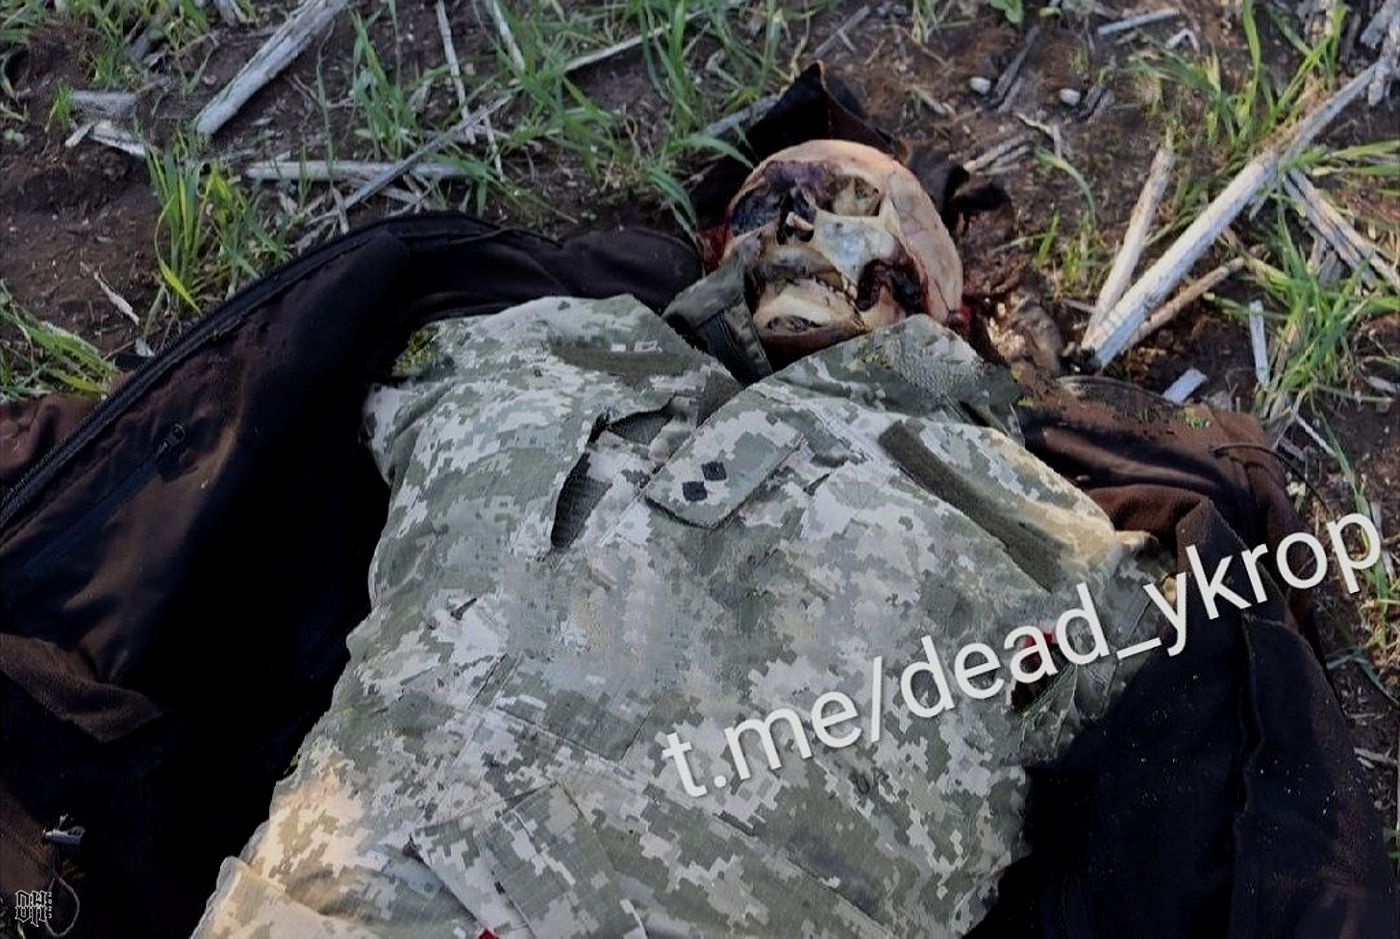 DH - Sldiers' Horror Faces and Bodies of Russia-Ukraine Conflict 26.jpg